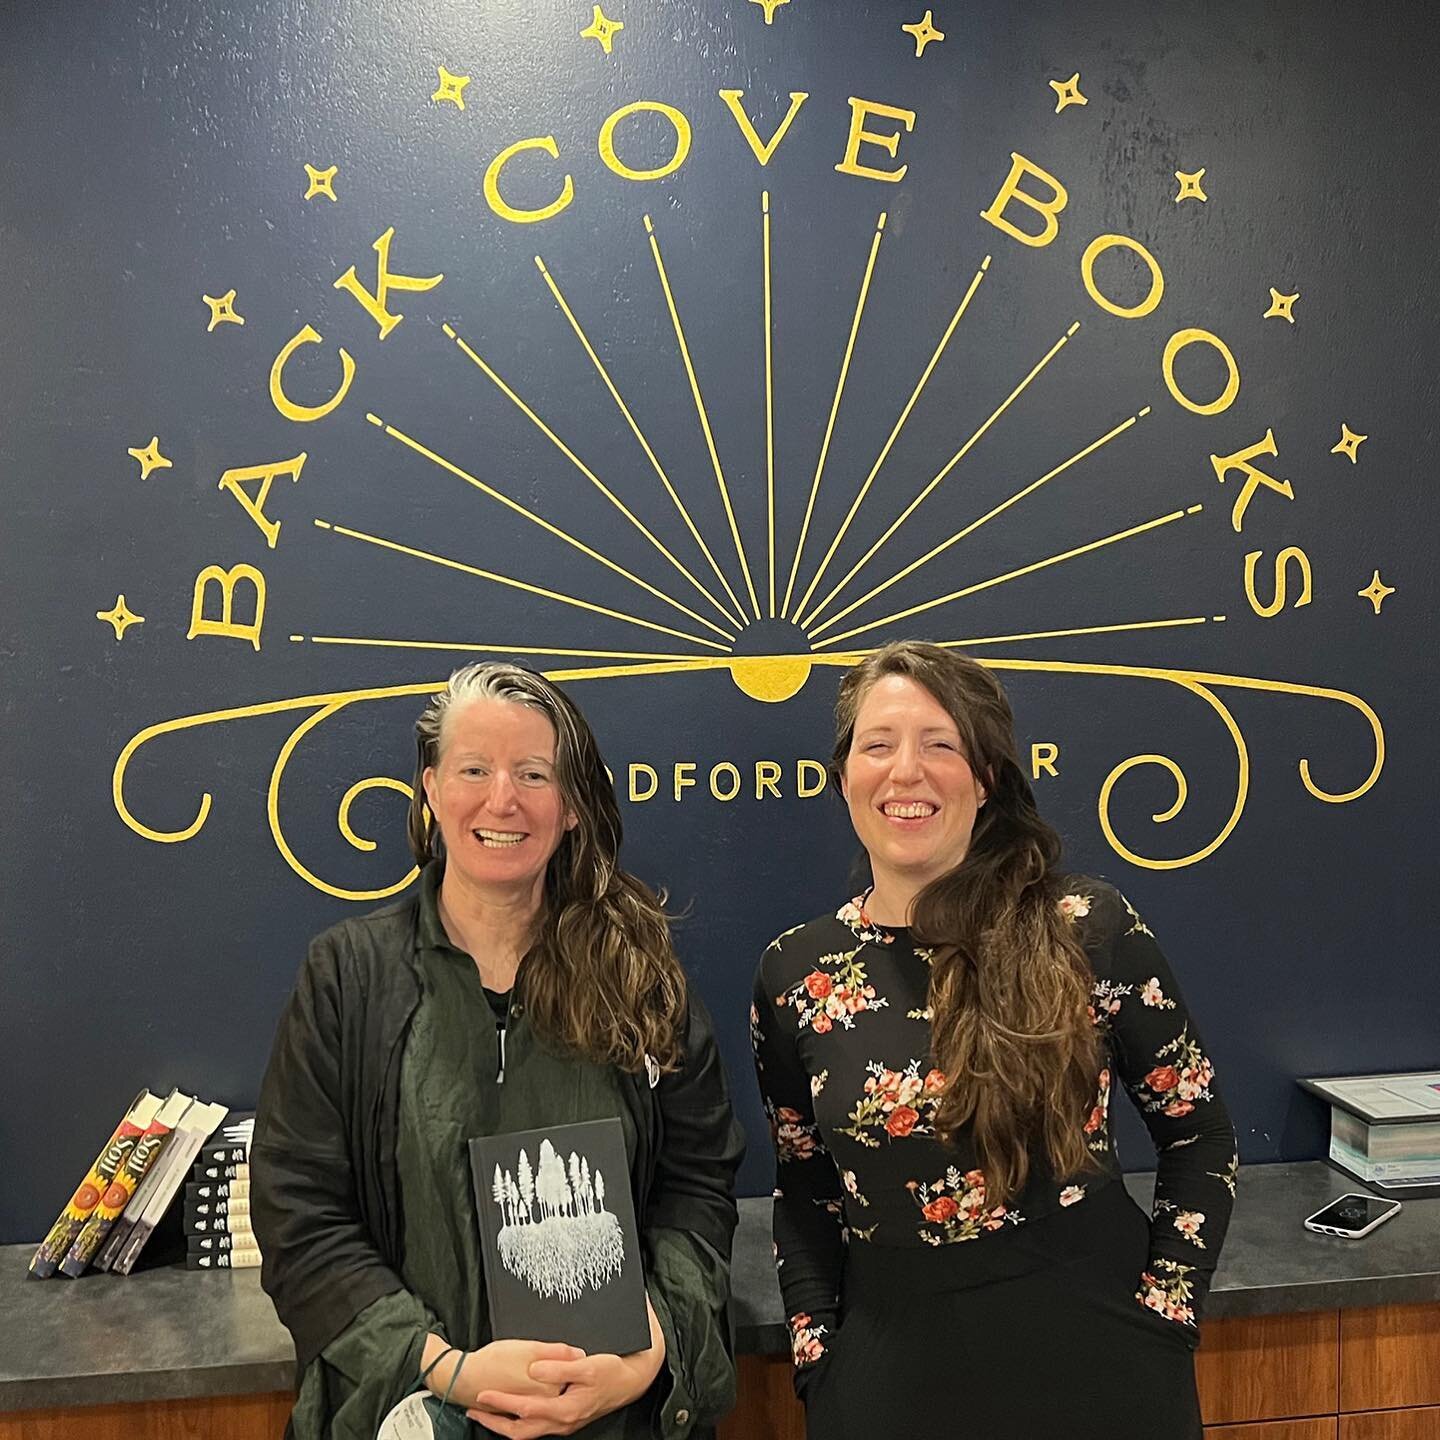 Last night was lovely, a very special evening with a room full of open hearts and kind souls. ❤️

I'm so grateful to 
@chelseasteinauerscudder 
 and everyone who joined us at beautiful @backcovebooks in Portland, Maine. 🙏

There was a lot of love to